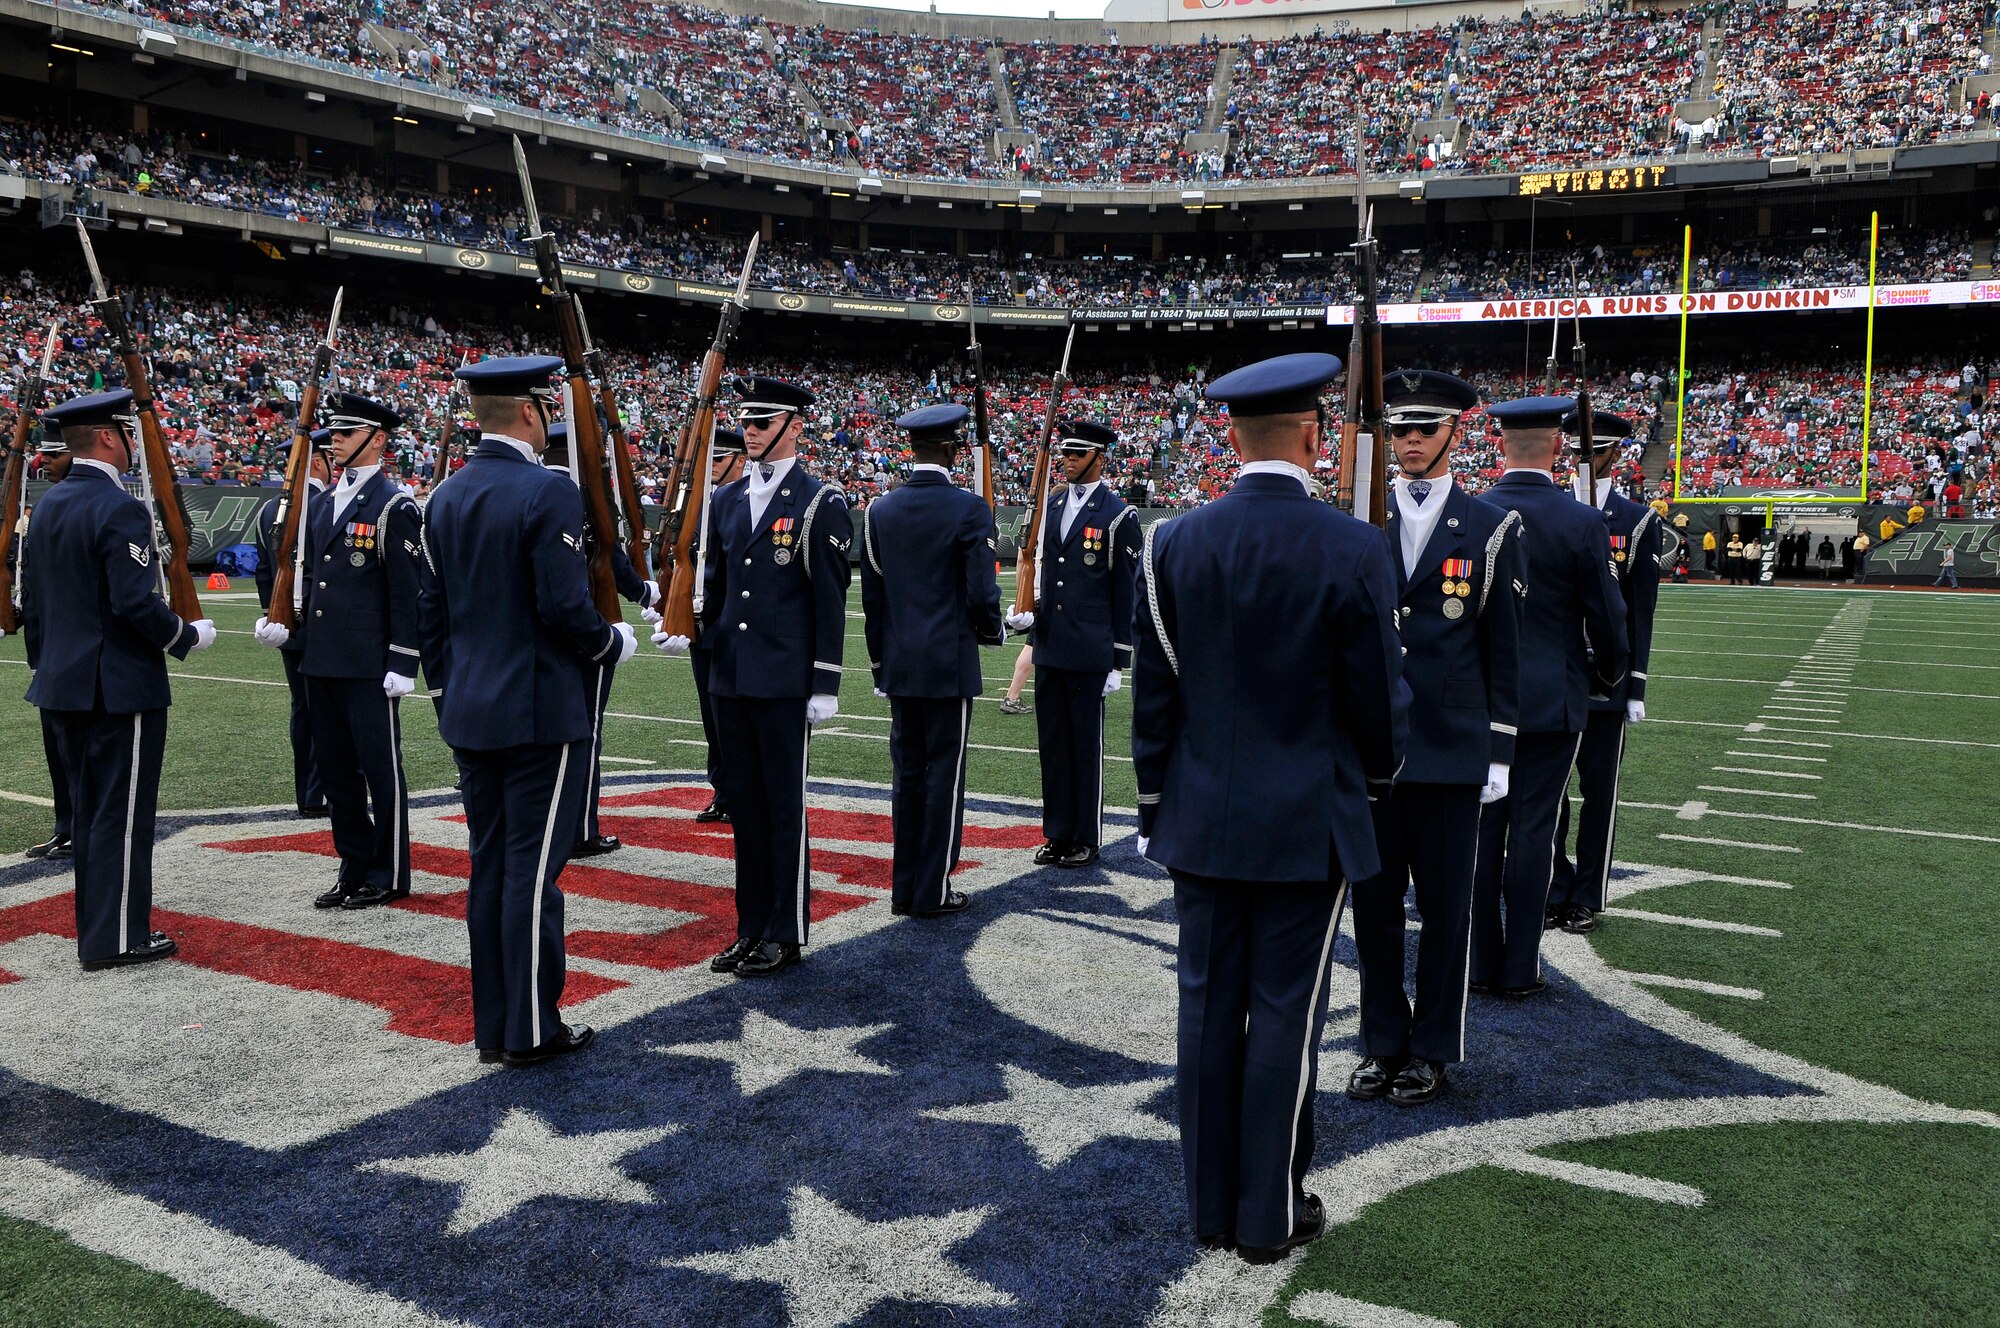 The United States Air Force Honor Guard Drill Team performs during the halftime show at a New York Jets football game against the Jacksonville Jaguars at Giants Stadium Nov. 15, in East Rutherford, New Jersey. The Drill Team tours worldwide as ‘Ambassadors in blue’ personifying the integrity, discipline, and teamwork of every Airman and every Air Force mission. During the Air Force Honor Guard's 60-year history, their traveling component, the Drill Team, has performed in every state of the union and many countries abroad. (U.S. Air Force photo/Senior Airman Marleah Miller)